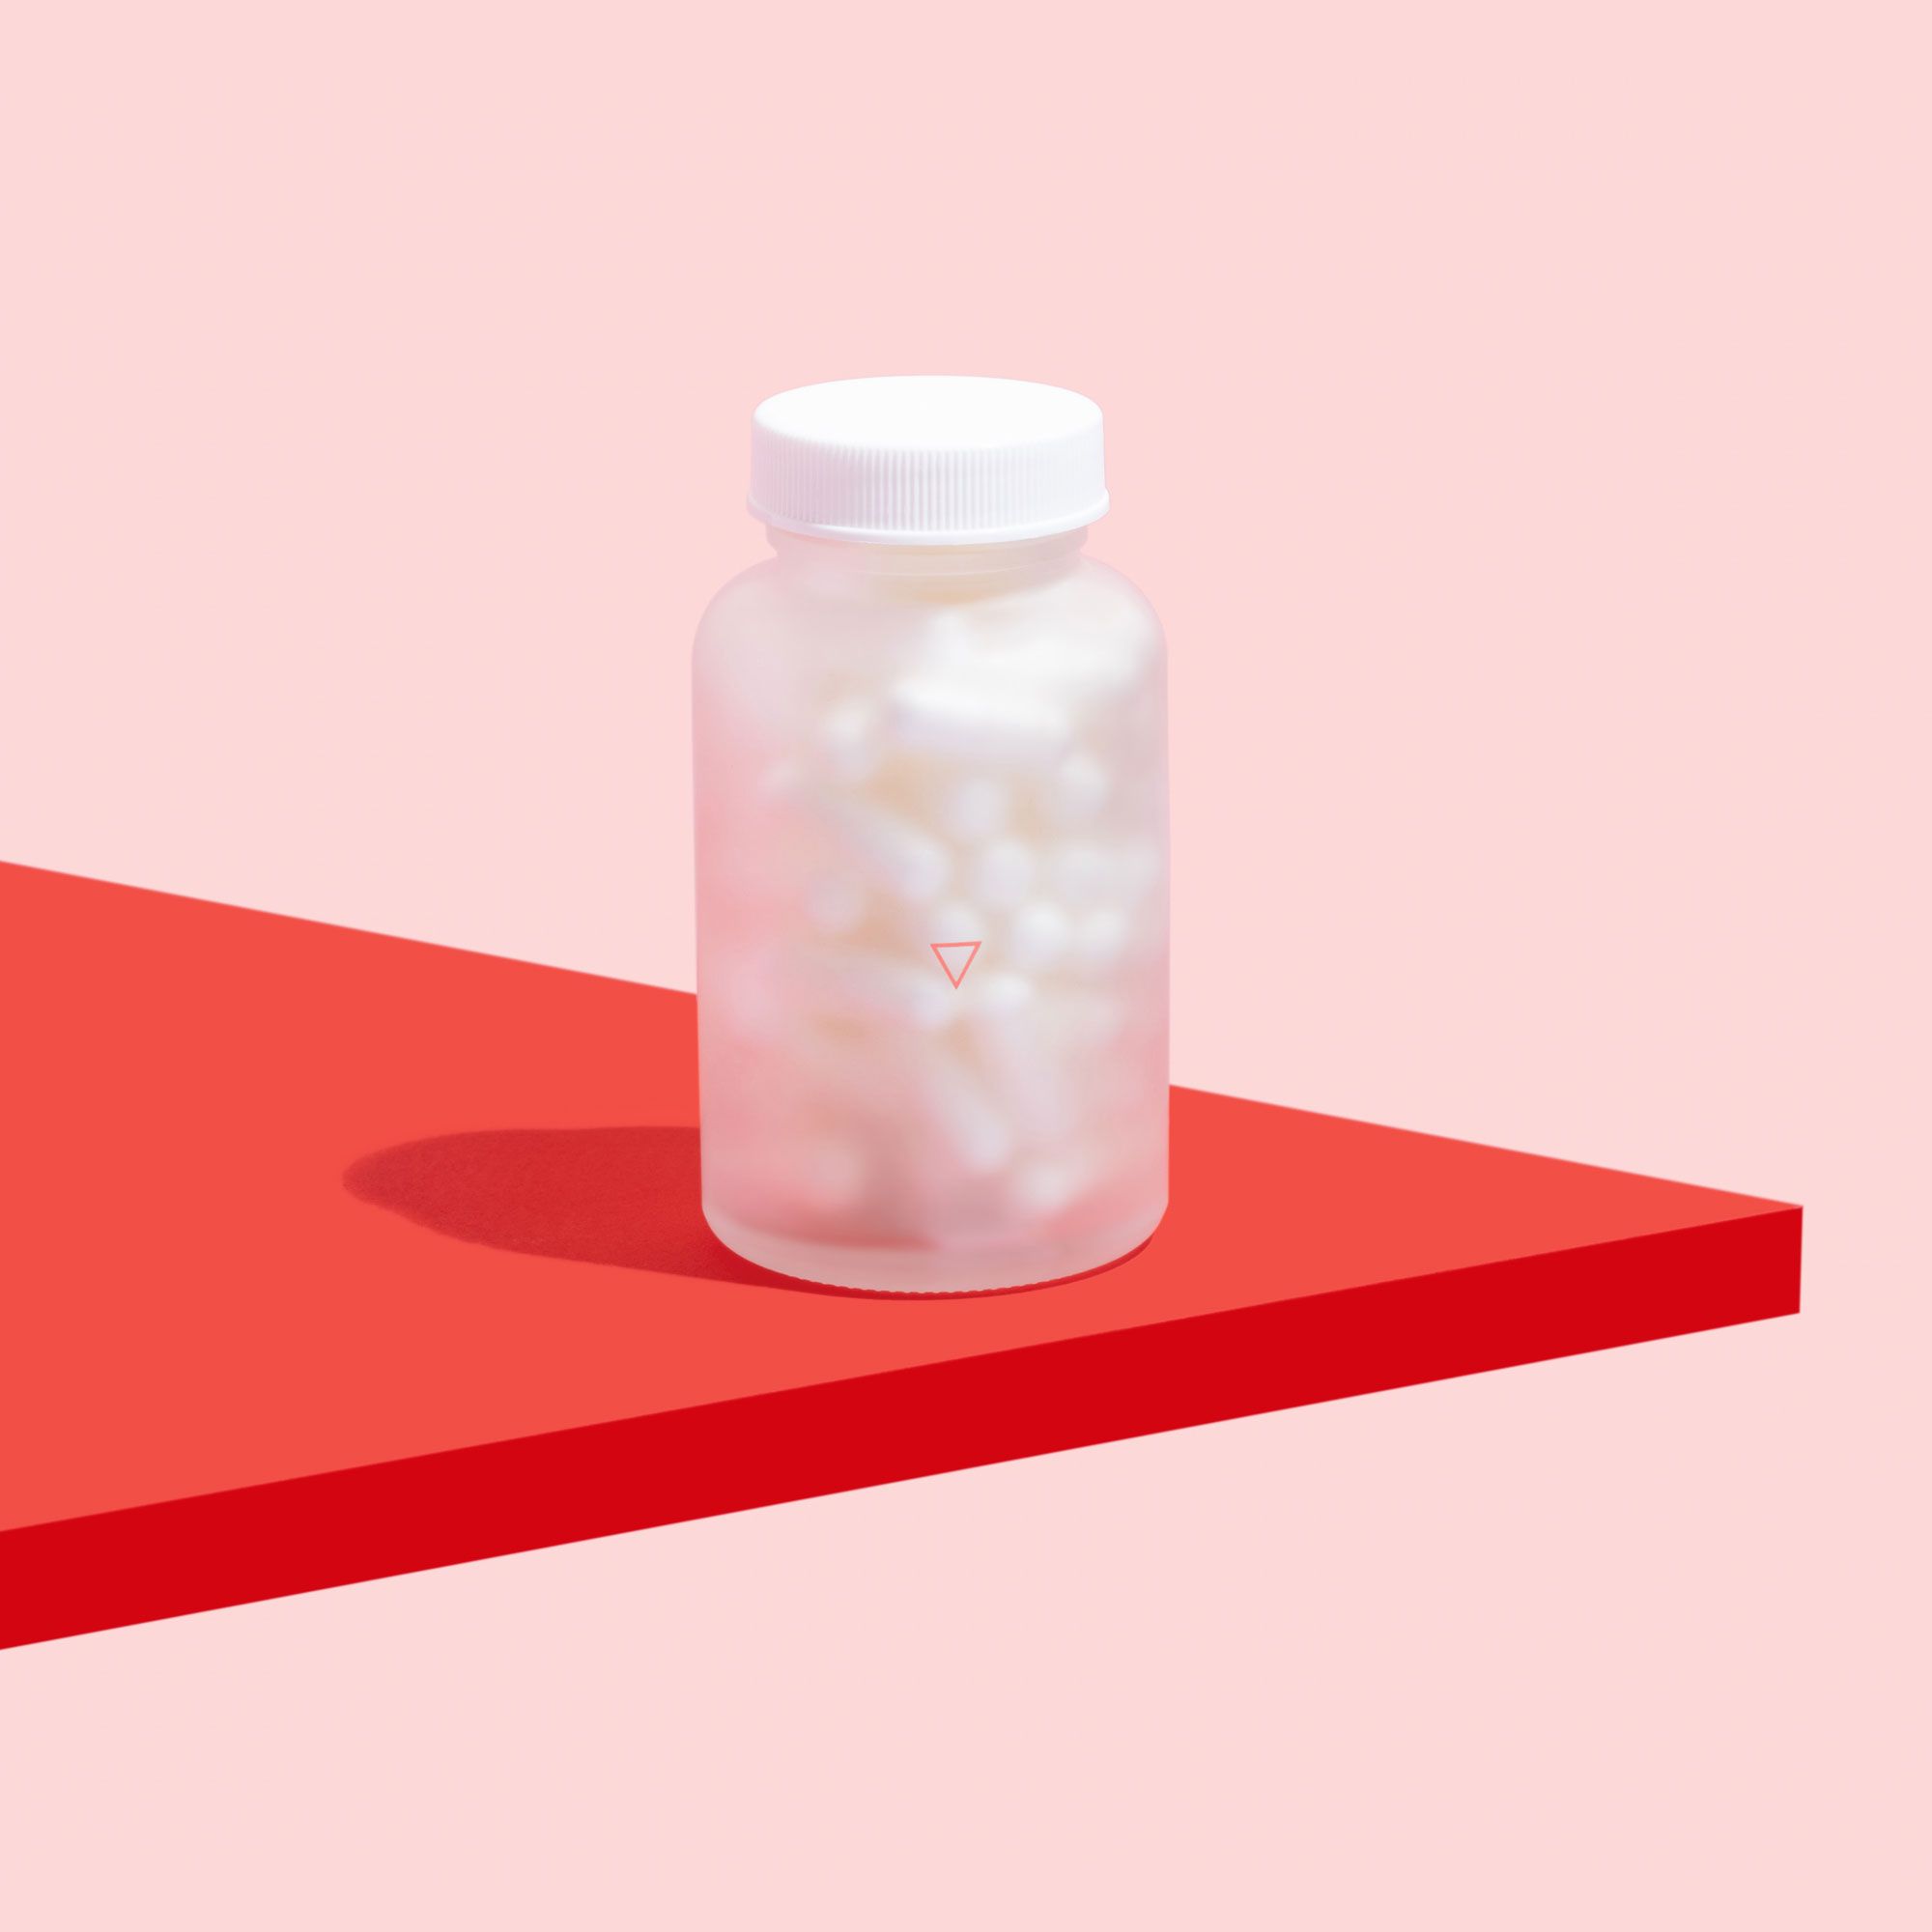 Jar of Lysine capsules to treat oral and genital herpes on a pink background and red surface